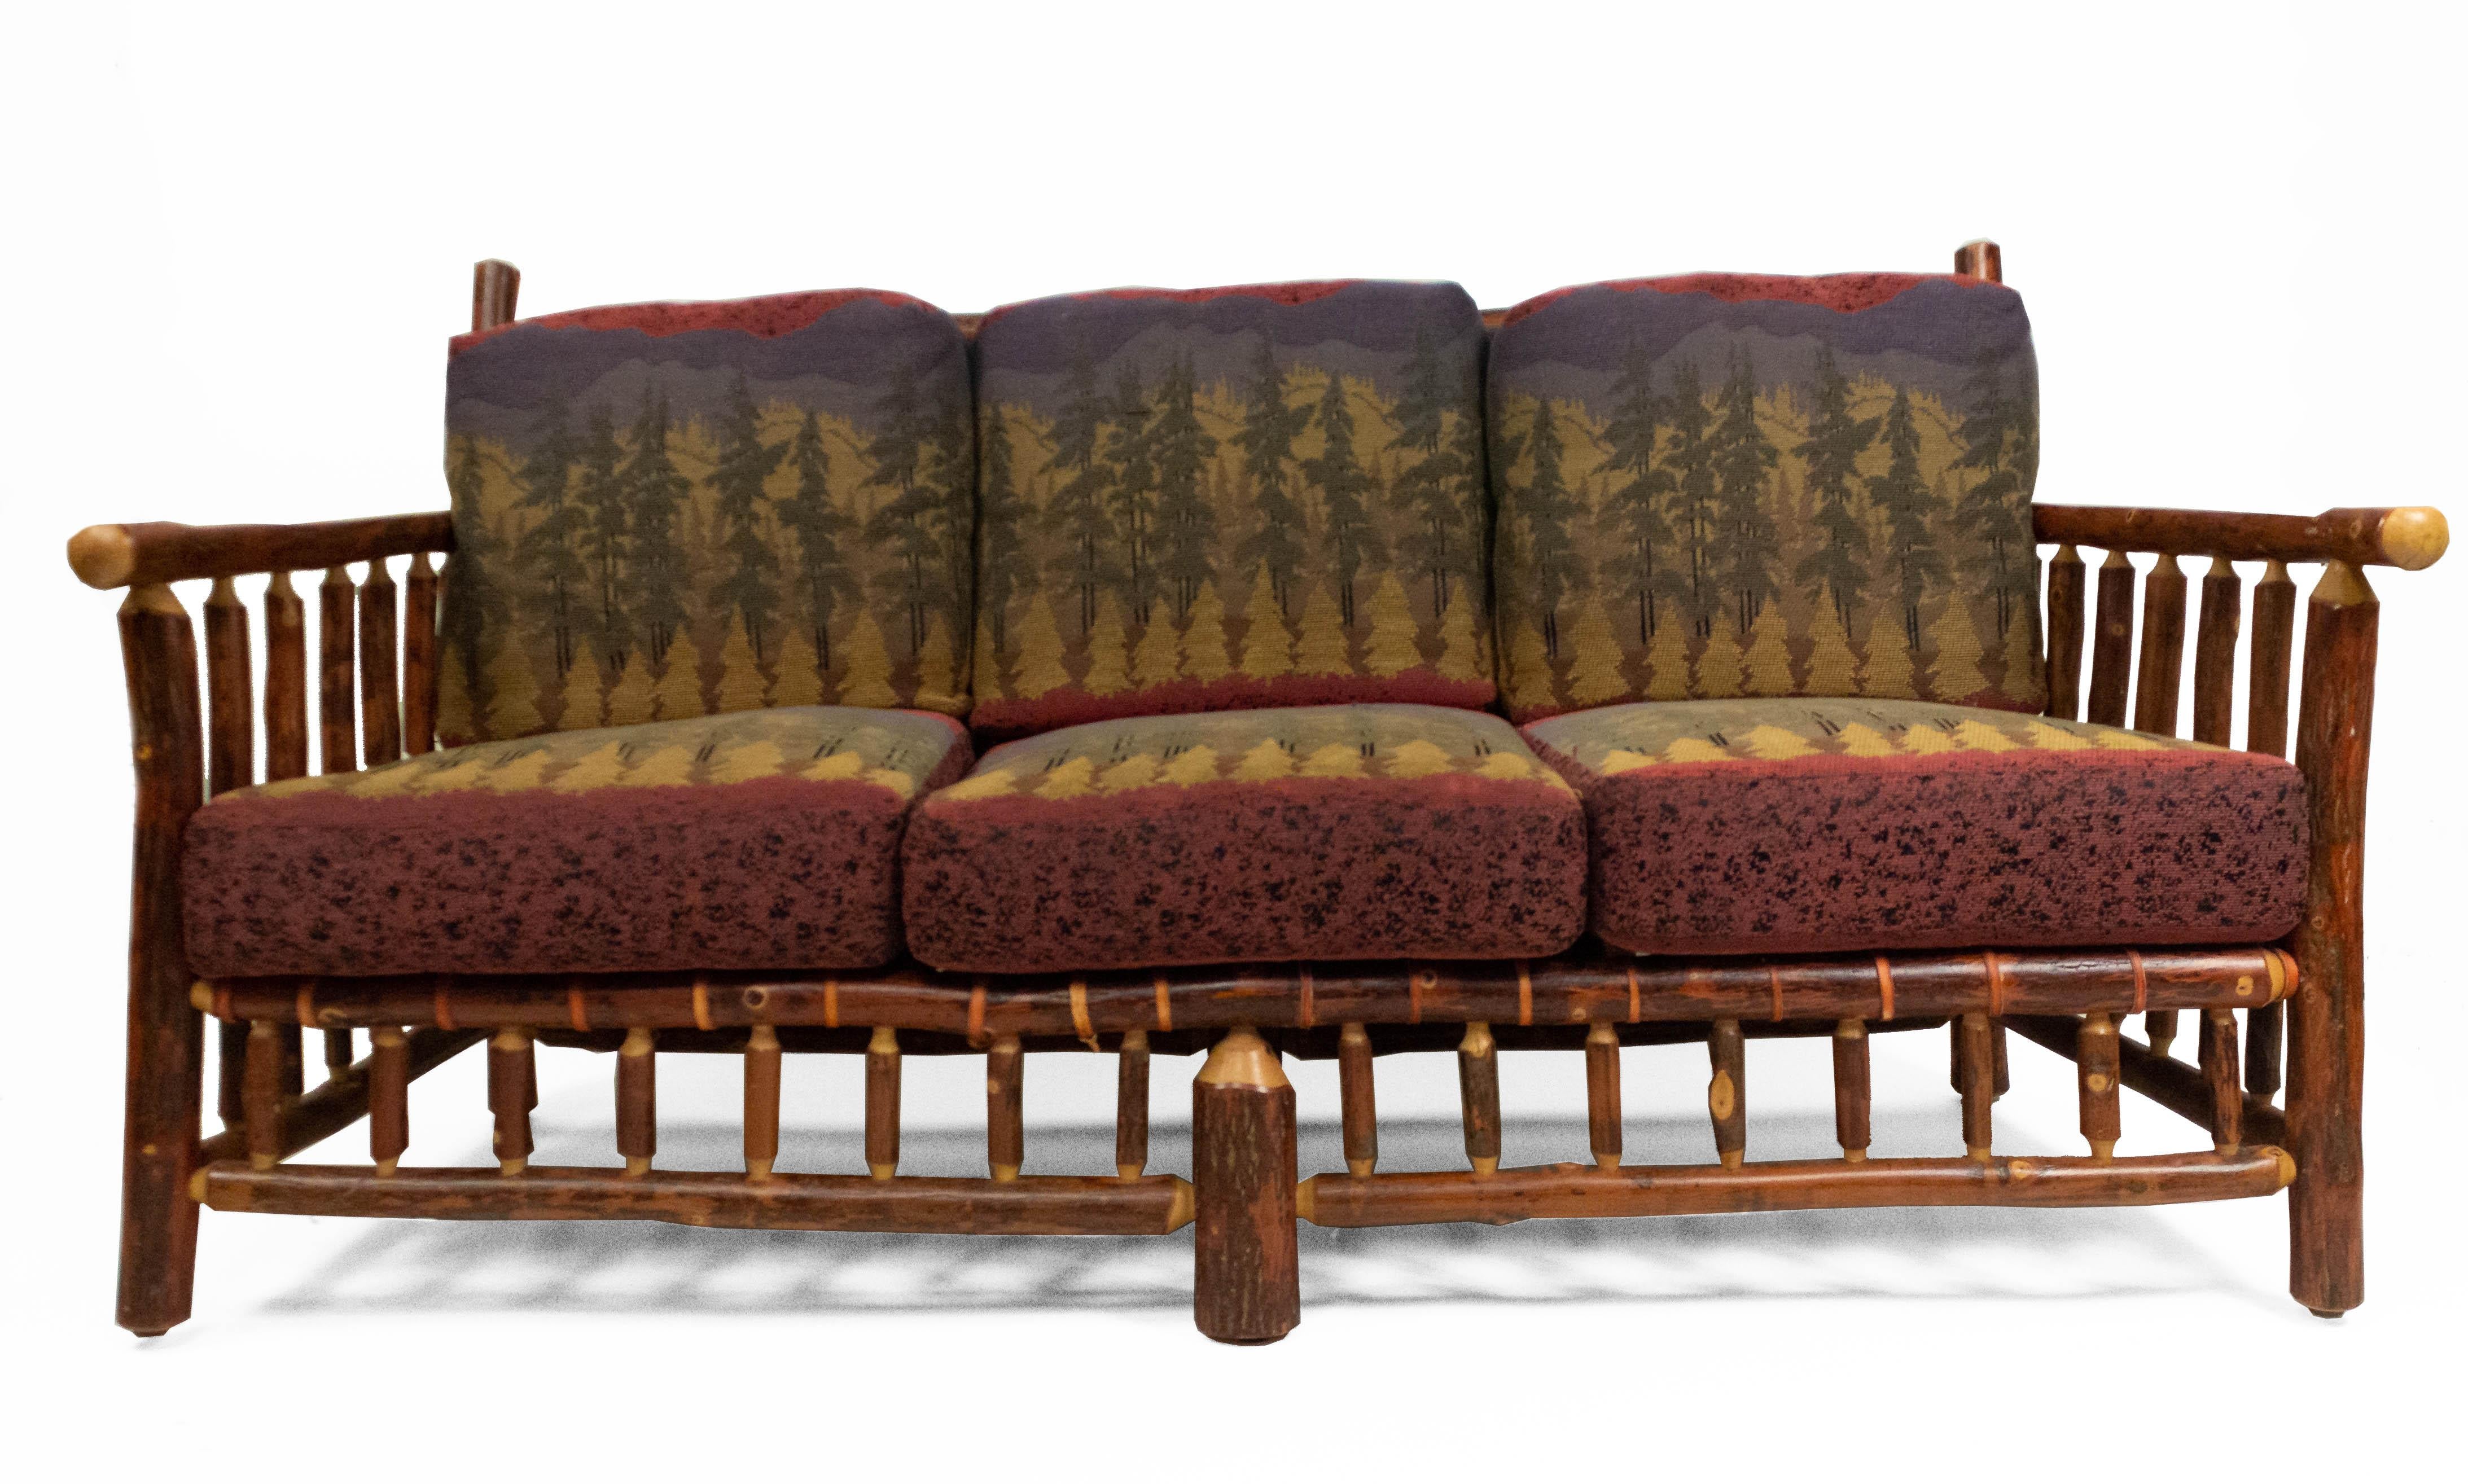 Rustic Old Hickory style (20th century) sofa / settee with spindle design sides, back, and base with 6 forest print upholstered cushions (brass Old Hickory tag).